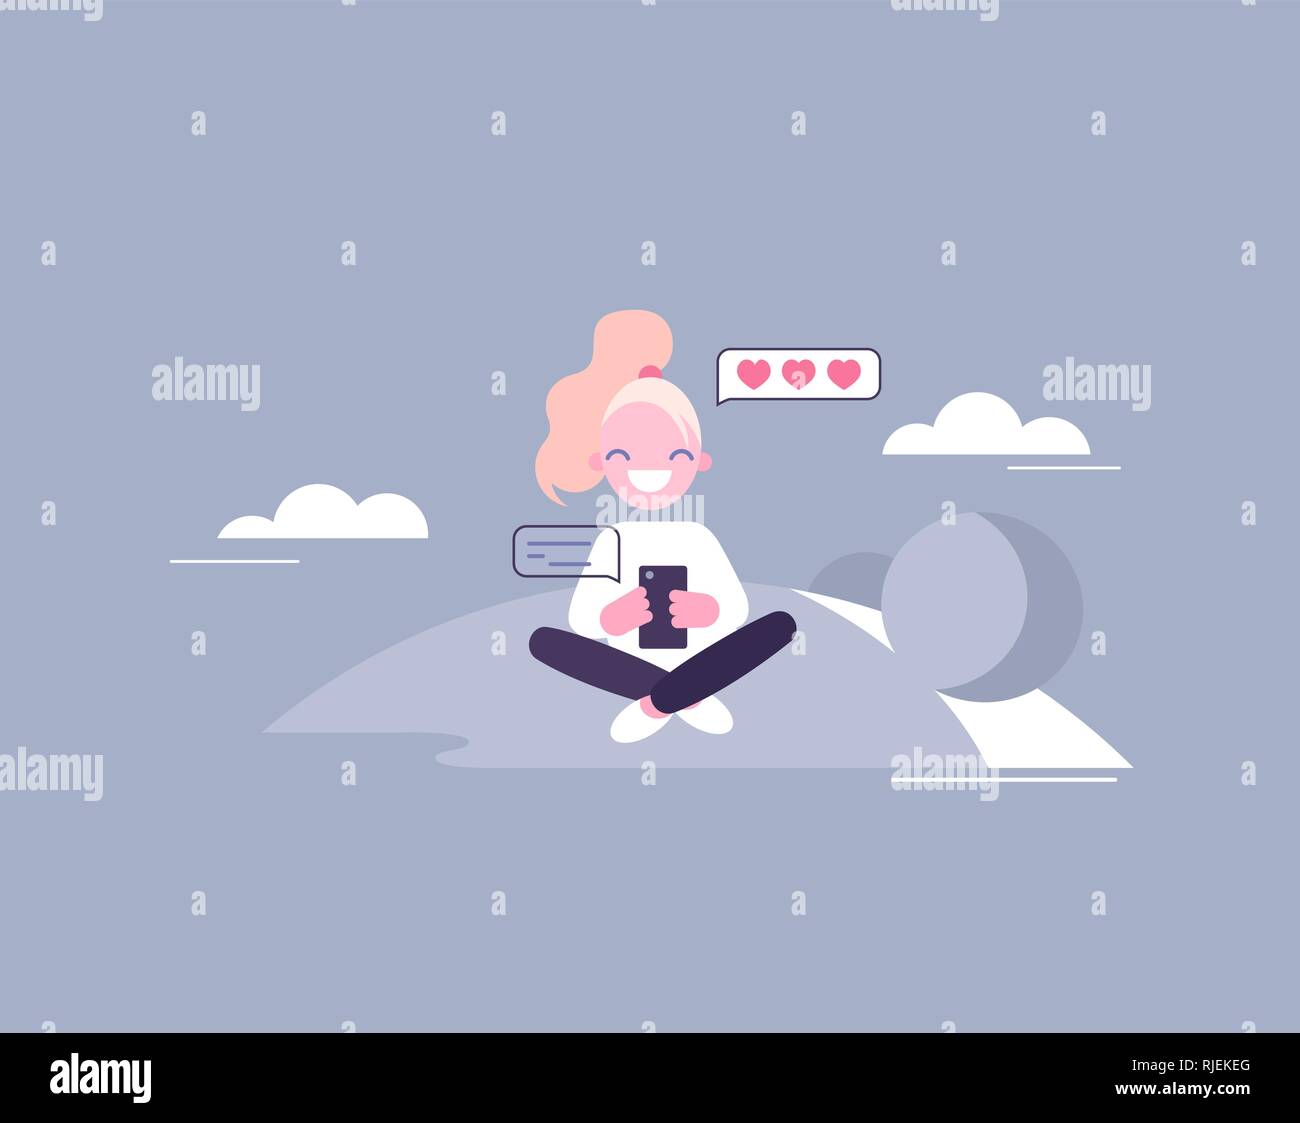 Girl chats and sends hearts message. Flat style vector illustration. Young woman seats on lawn and chats Stock Vector